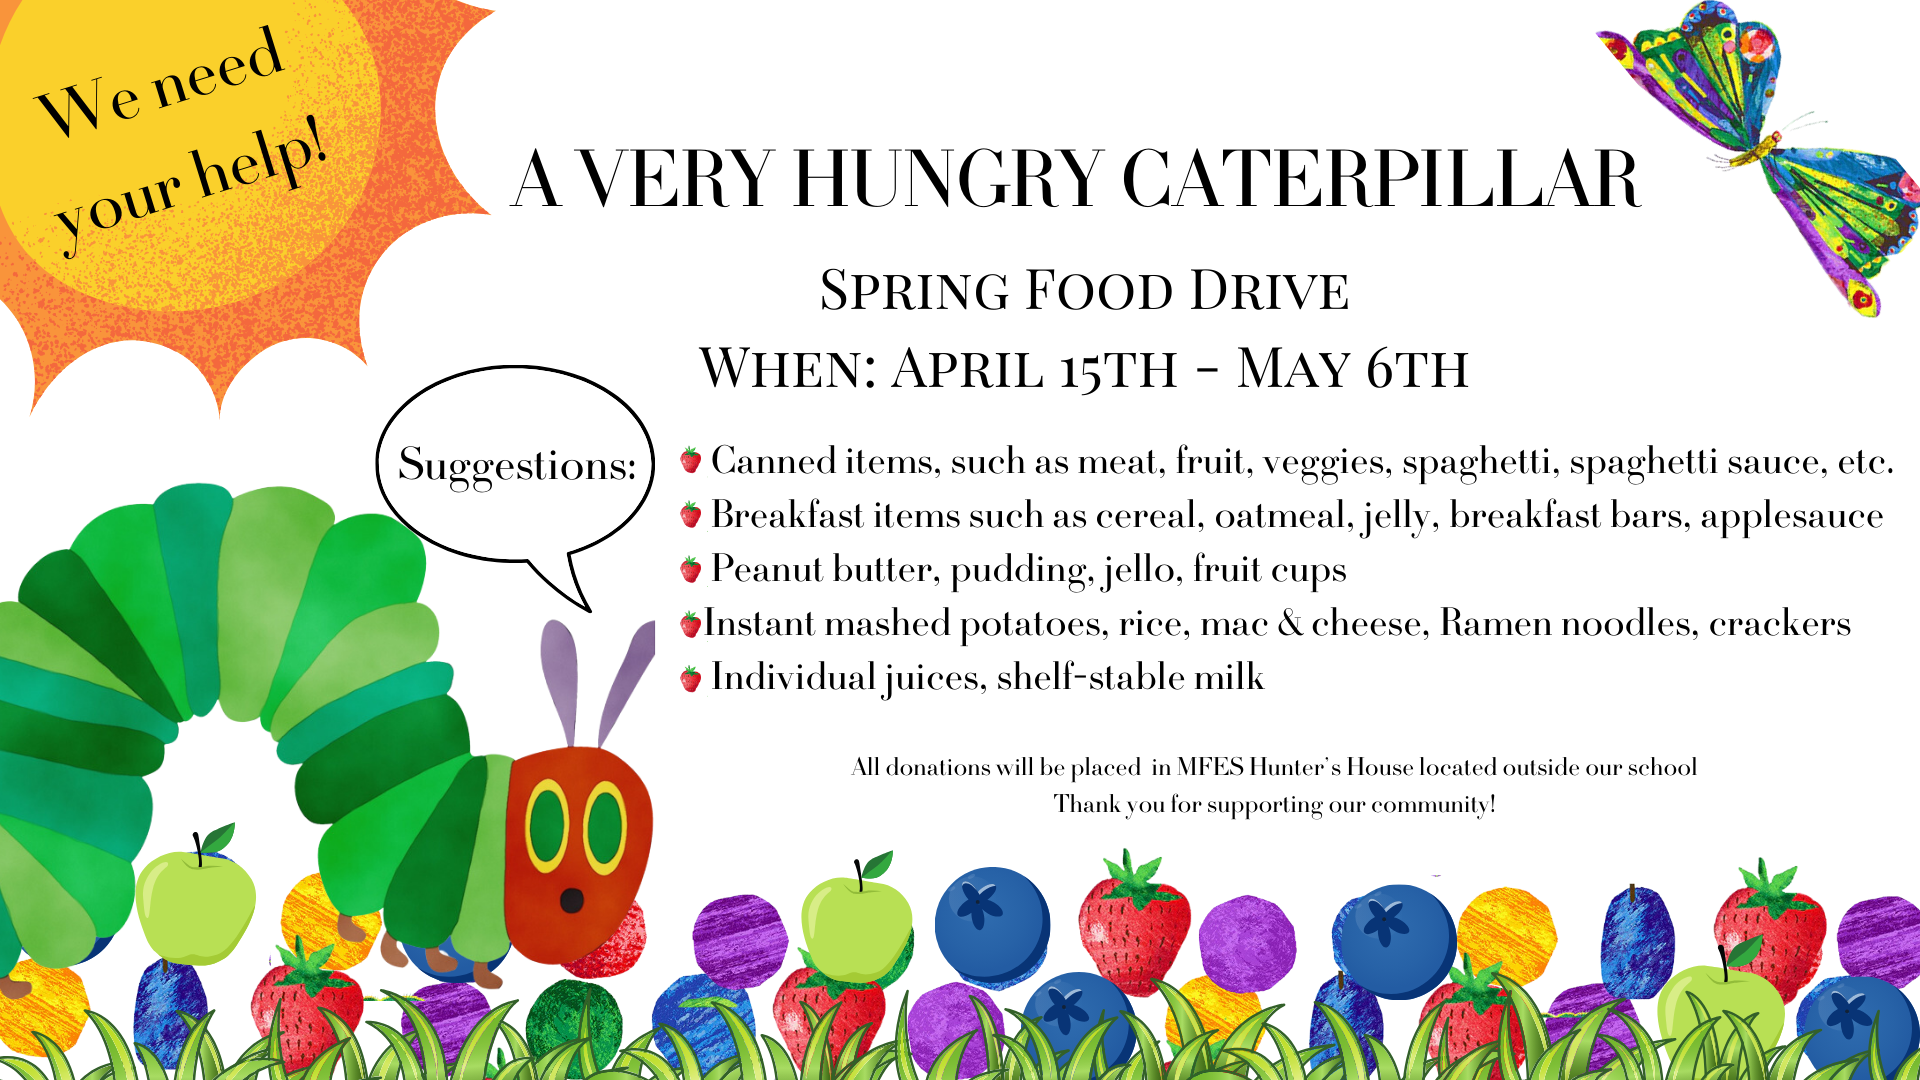 We are having a Very Hungry Caterpillar Spring Food Drive beginning April 15ht- through May 6th.